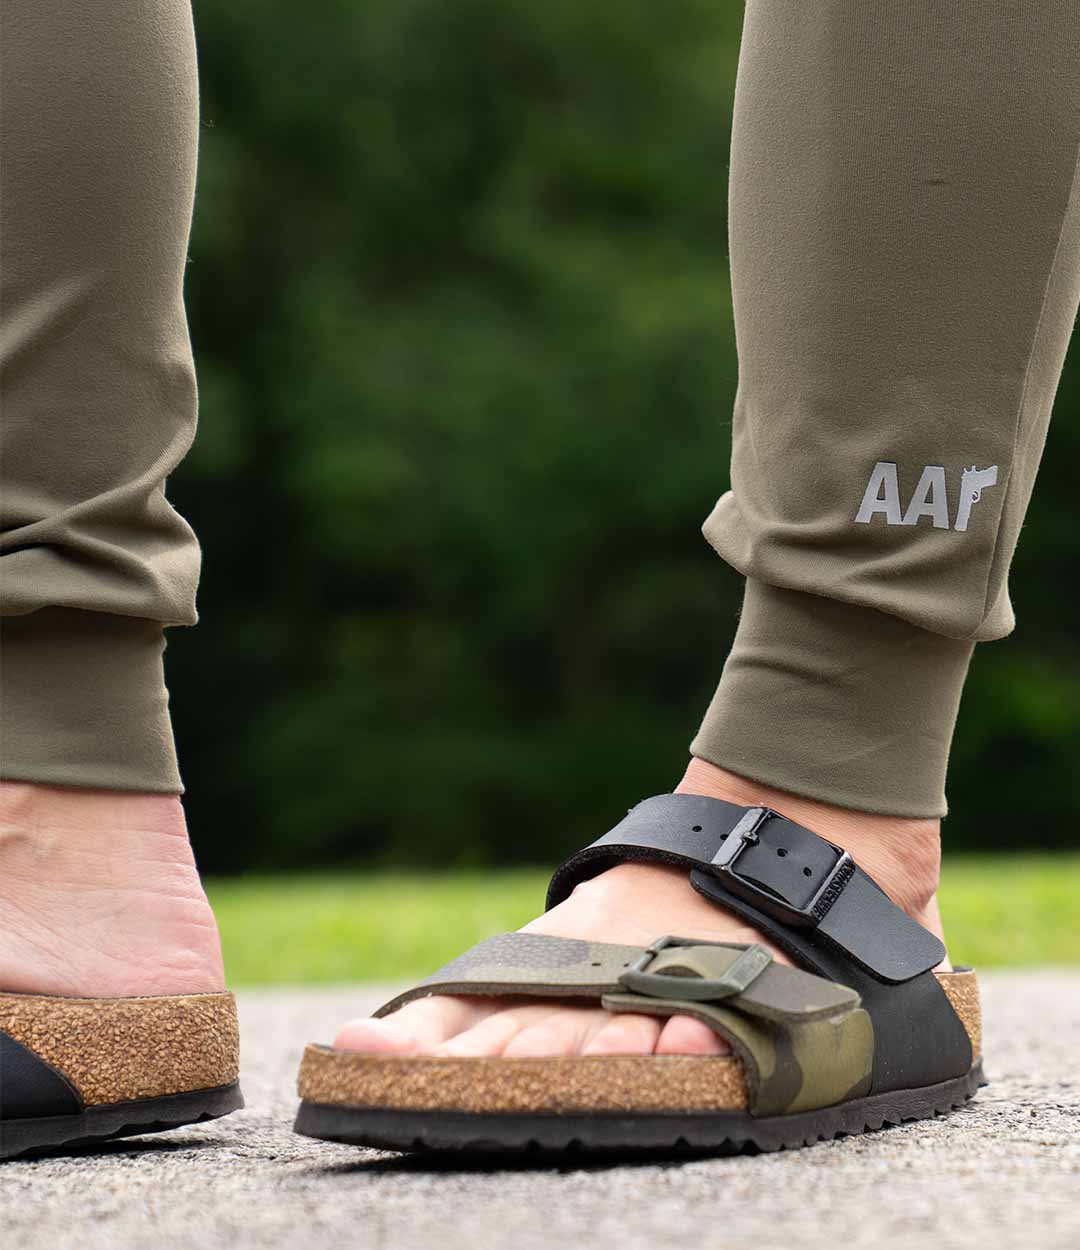 AAr Women's Joggers // Military - All American Roughneck